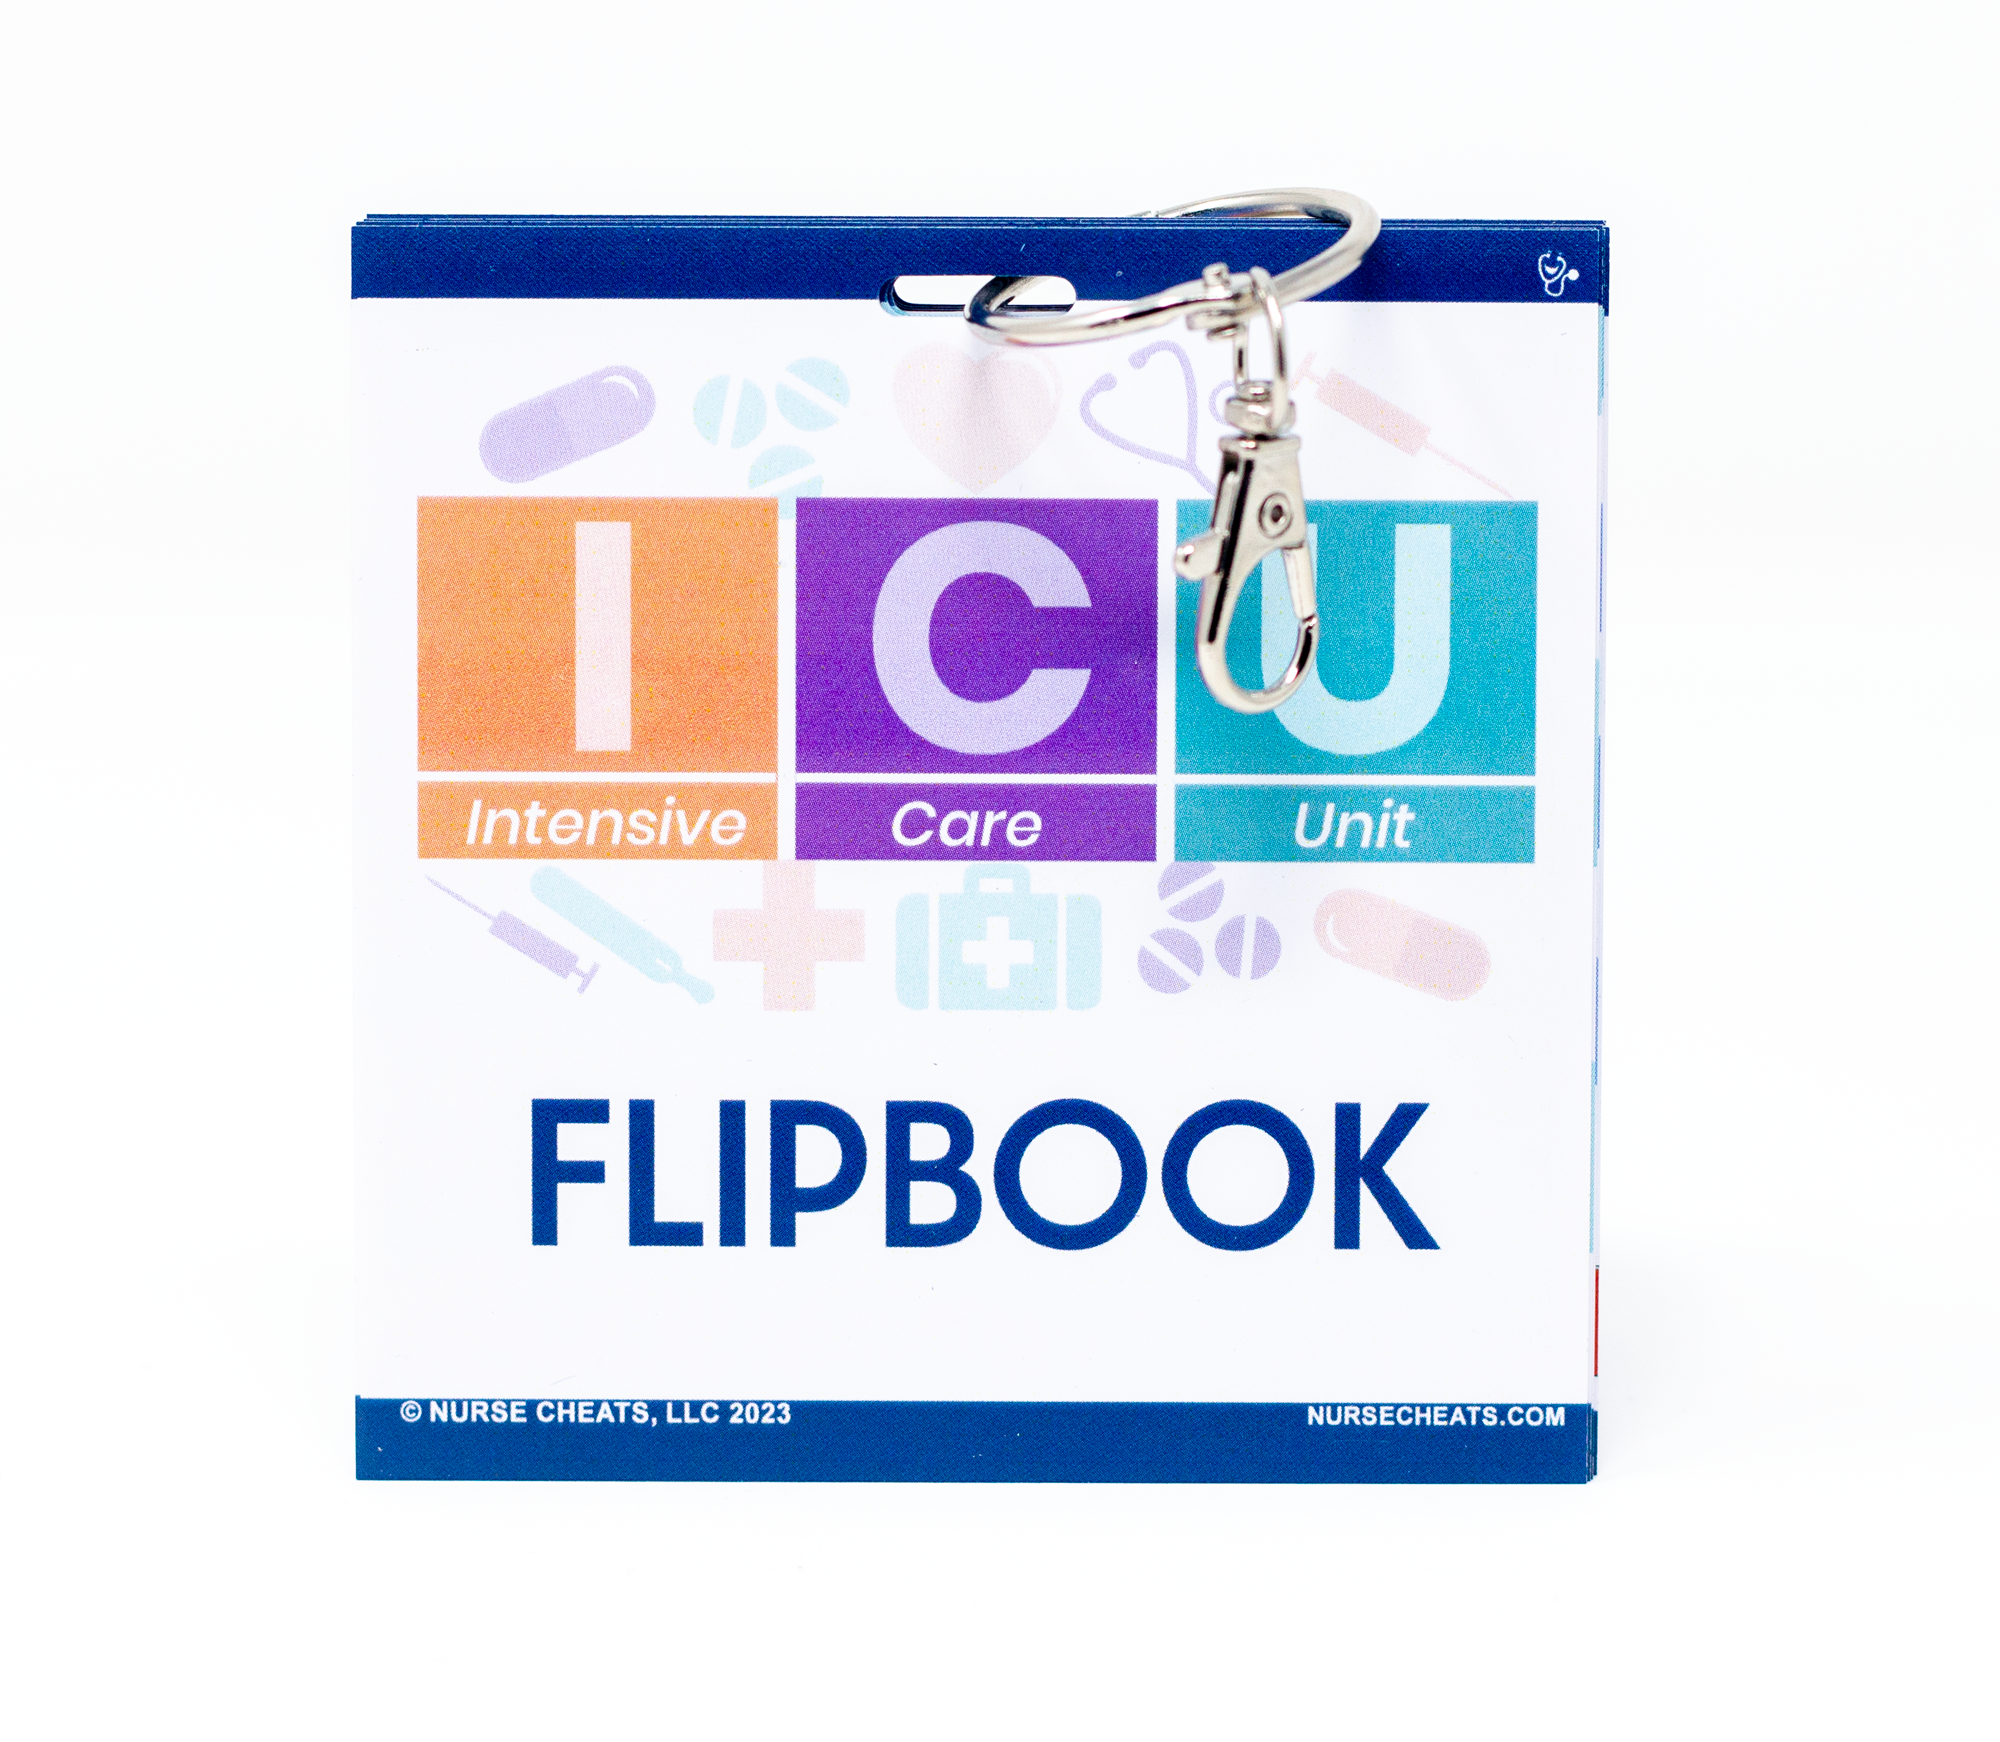 Our Critical Care bundle includes our ICU Badges, ICU Brain Sheet and IV Drips for the ICU and critical care.